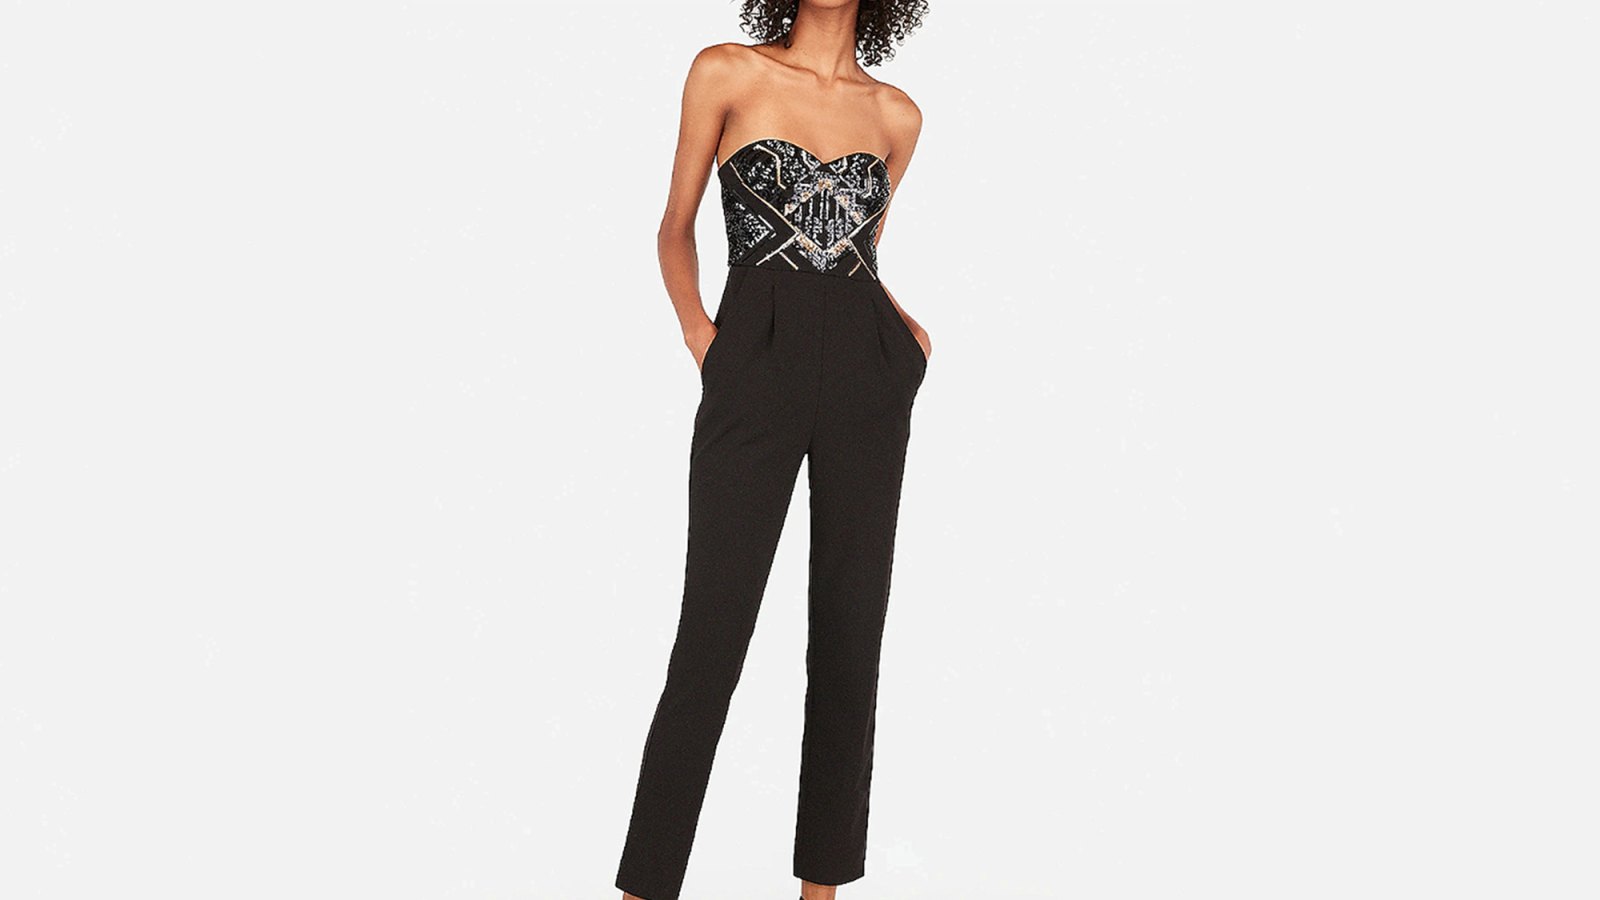 Sequin Geometric Strapless Sweetheart Jumpsuit